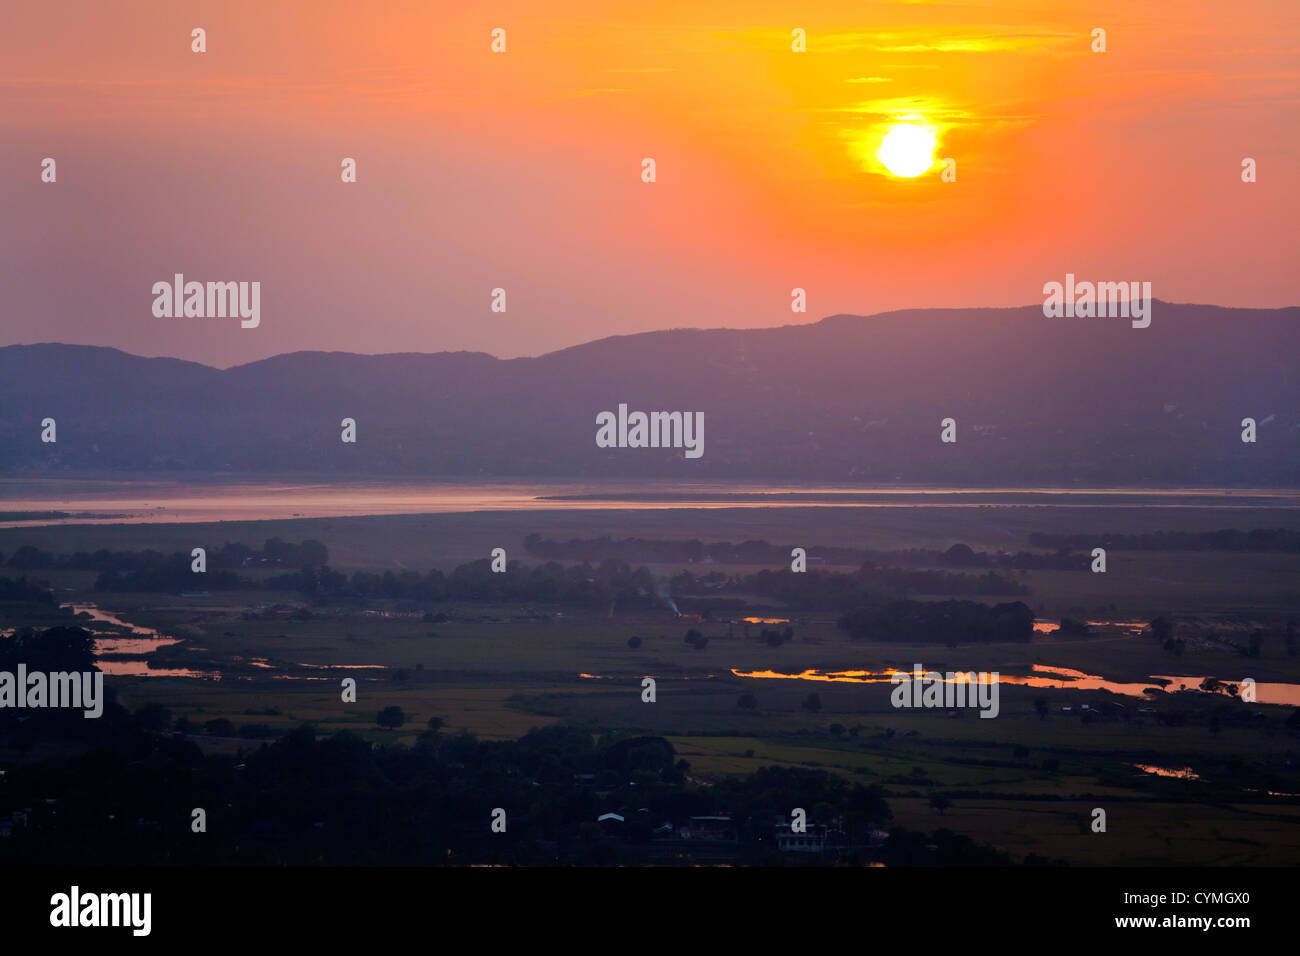 Sunset from MANDALAY HILL with view of the IRRAWADDY RIVER - MANDALAY, MYANMAR Stock Photo